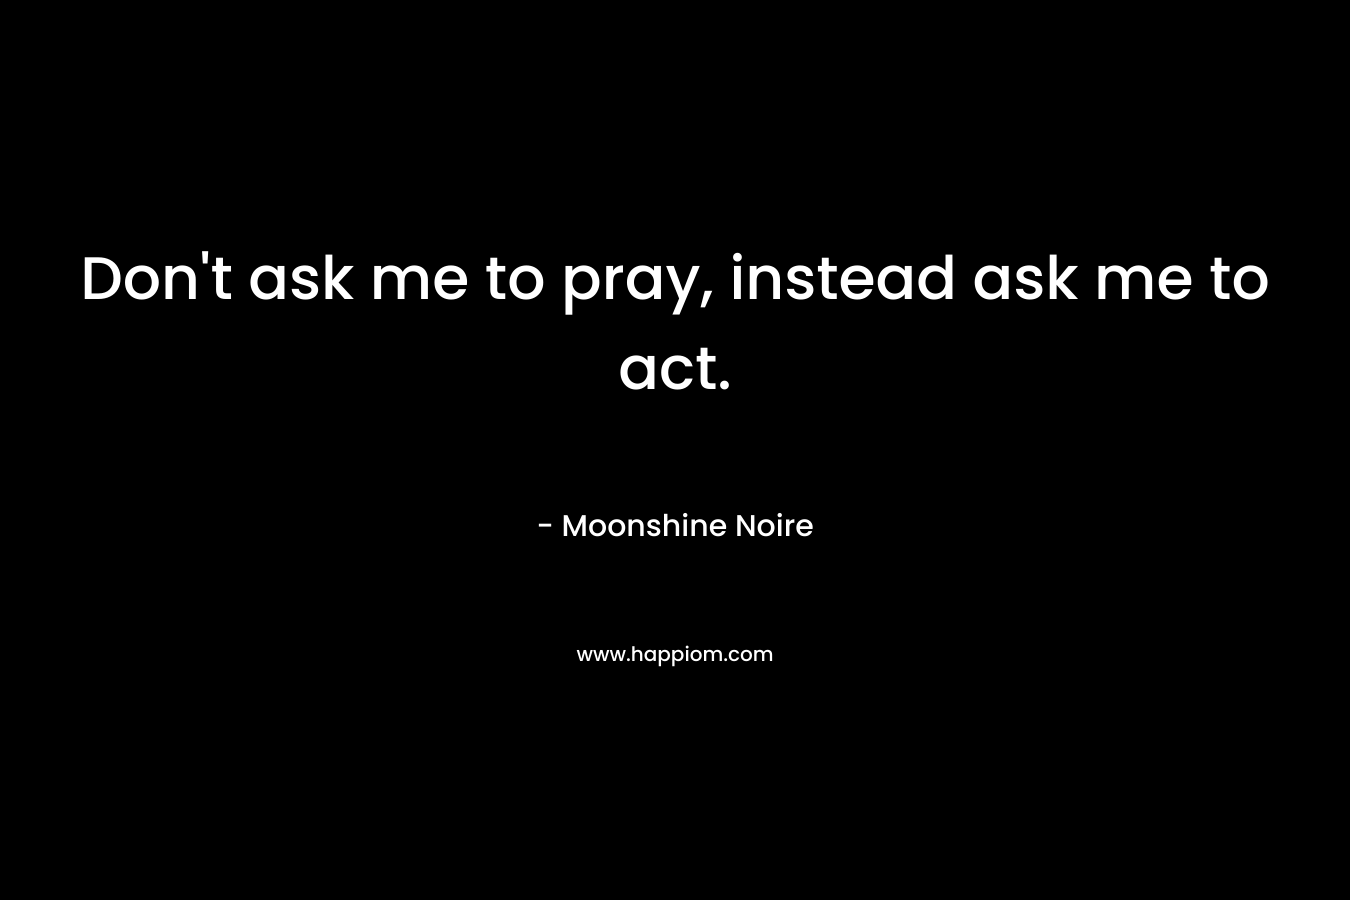 Don’t ask me to pray, instead ask me to act. – Moonshine Noire